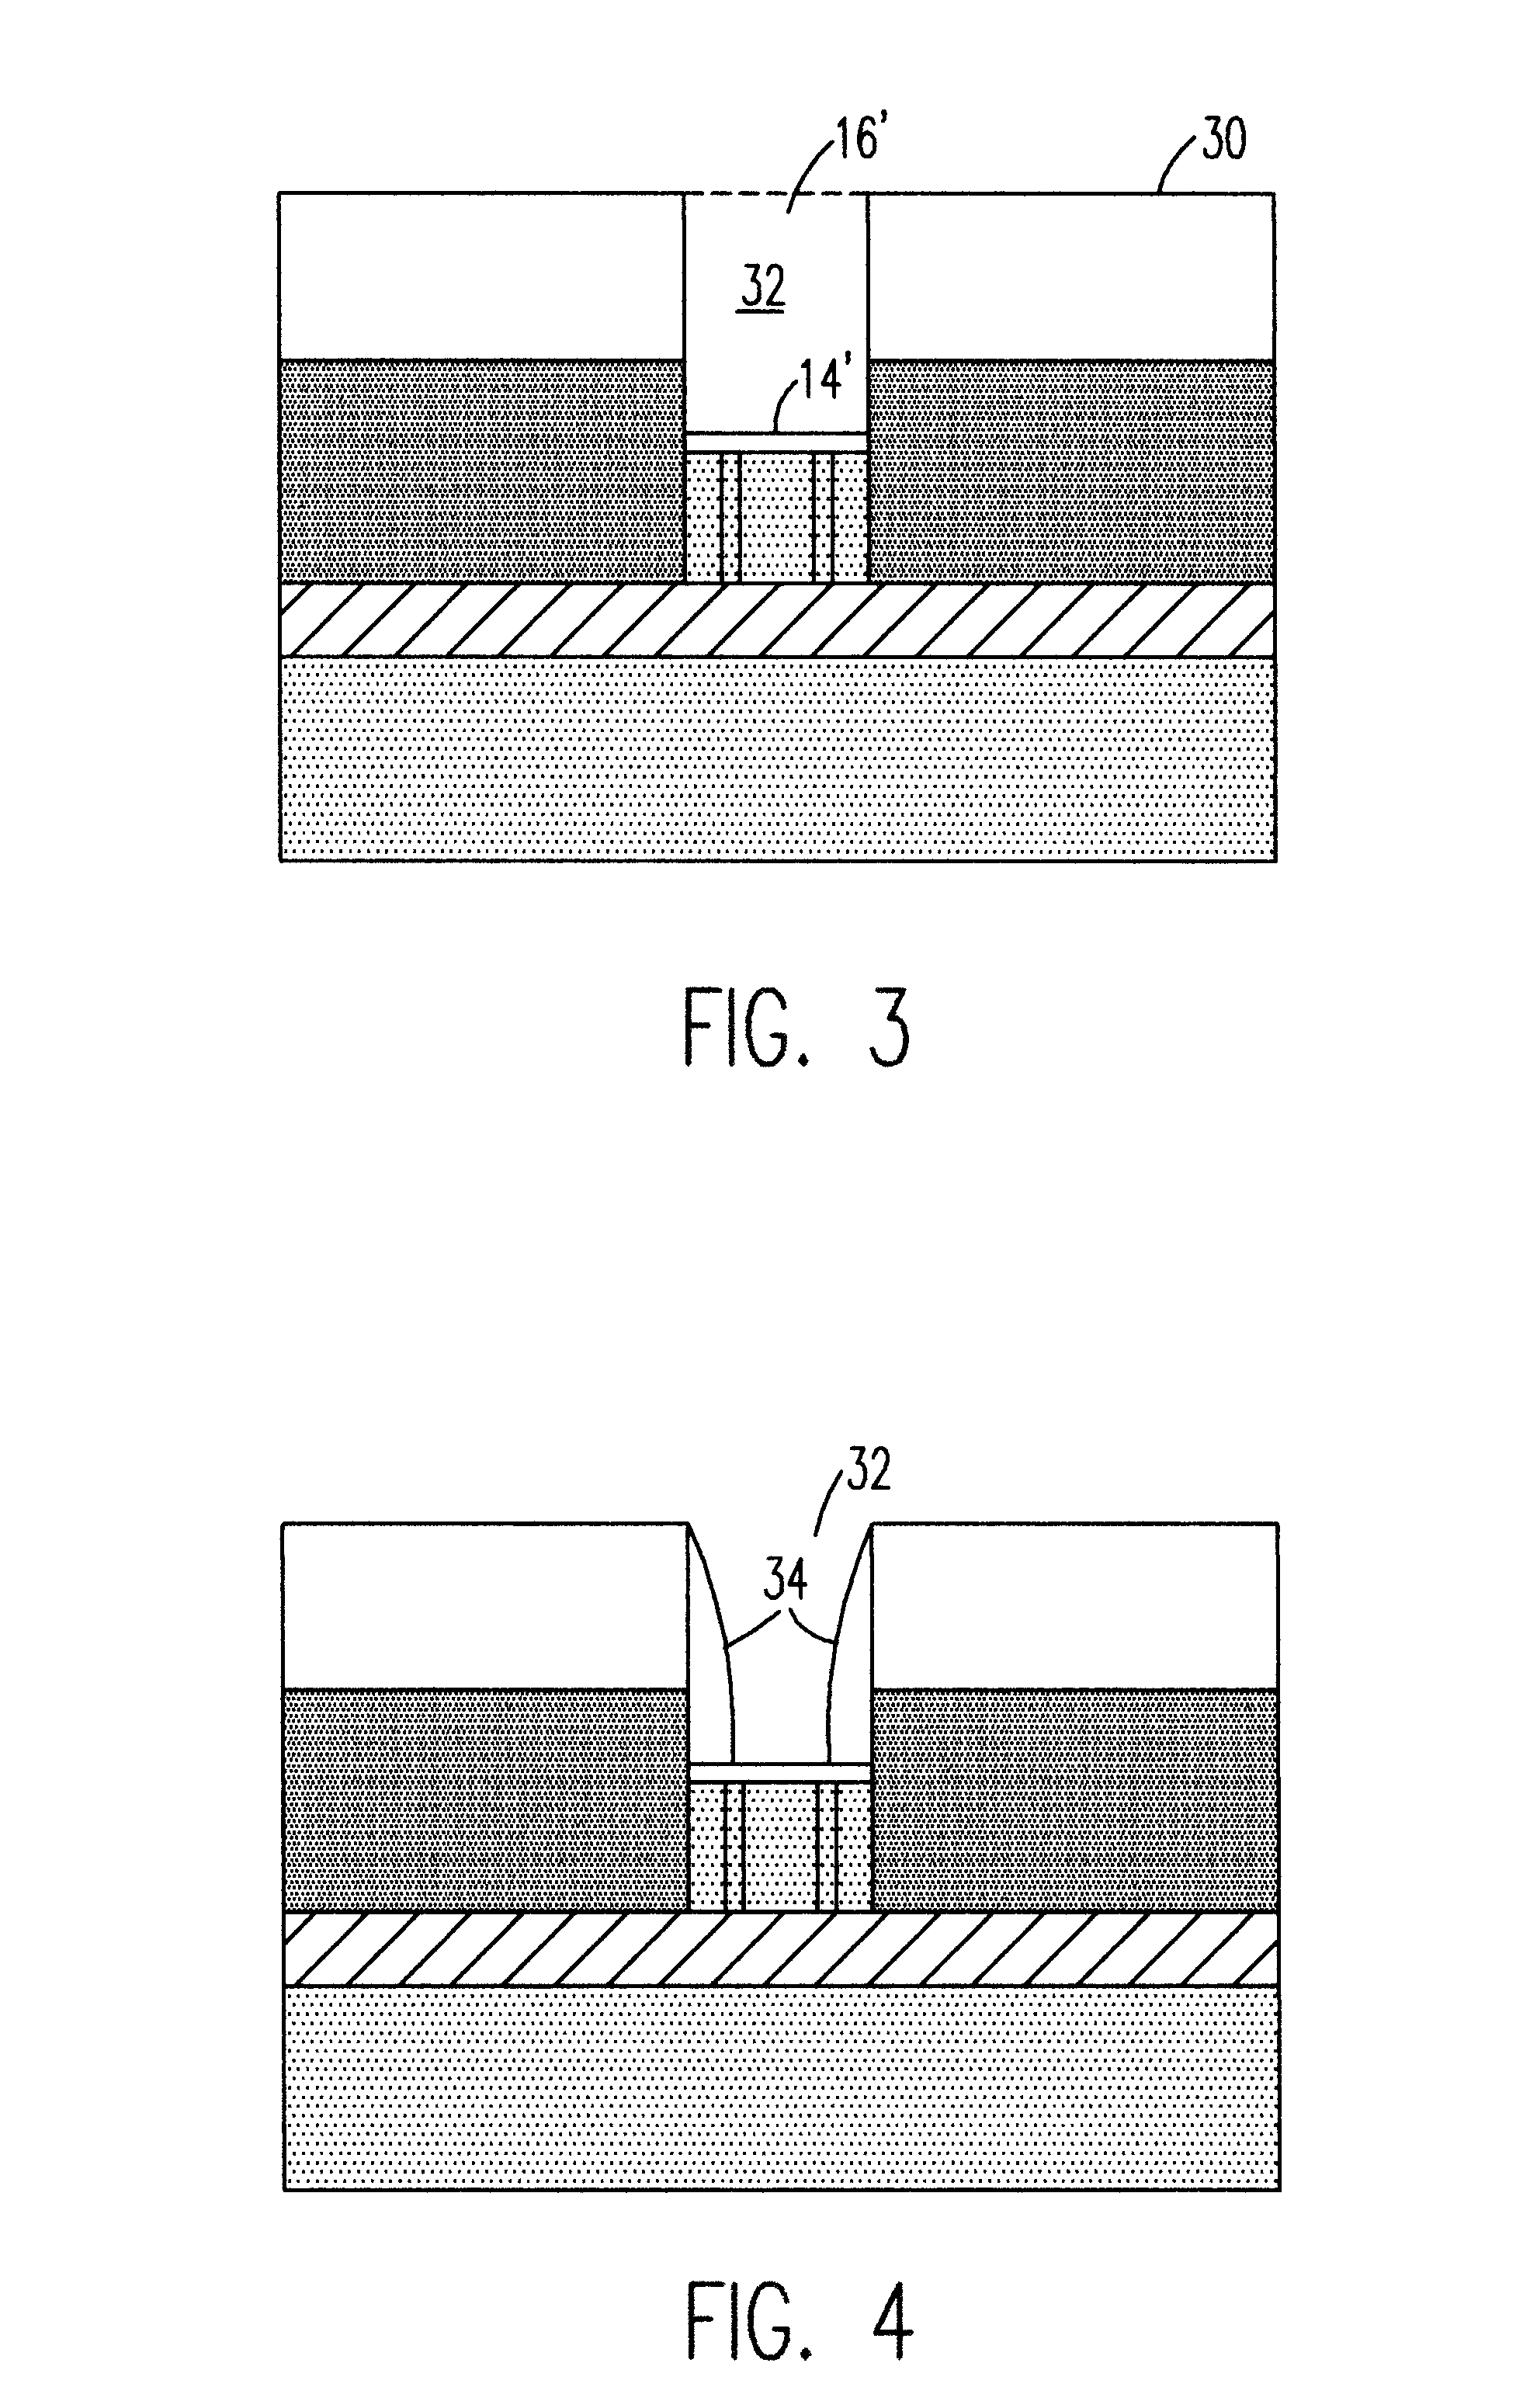 Polysilicon doped transistor using silicon-on-insulator and double silicon-on-insulator